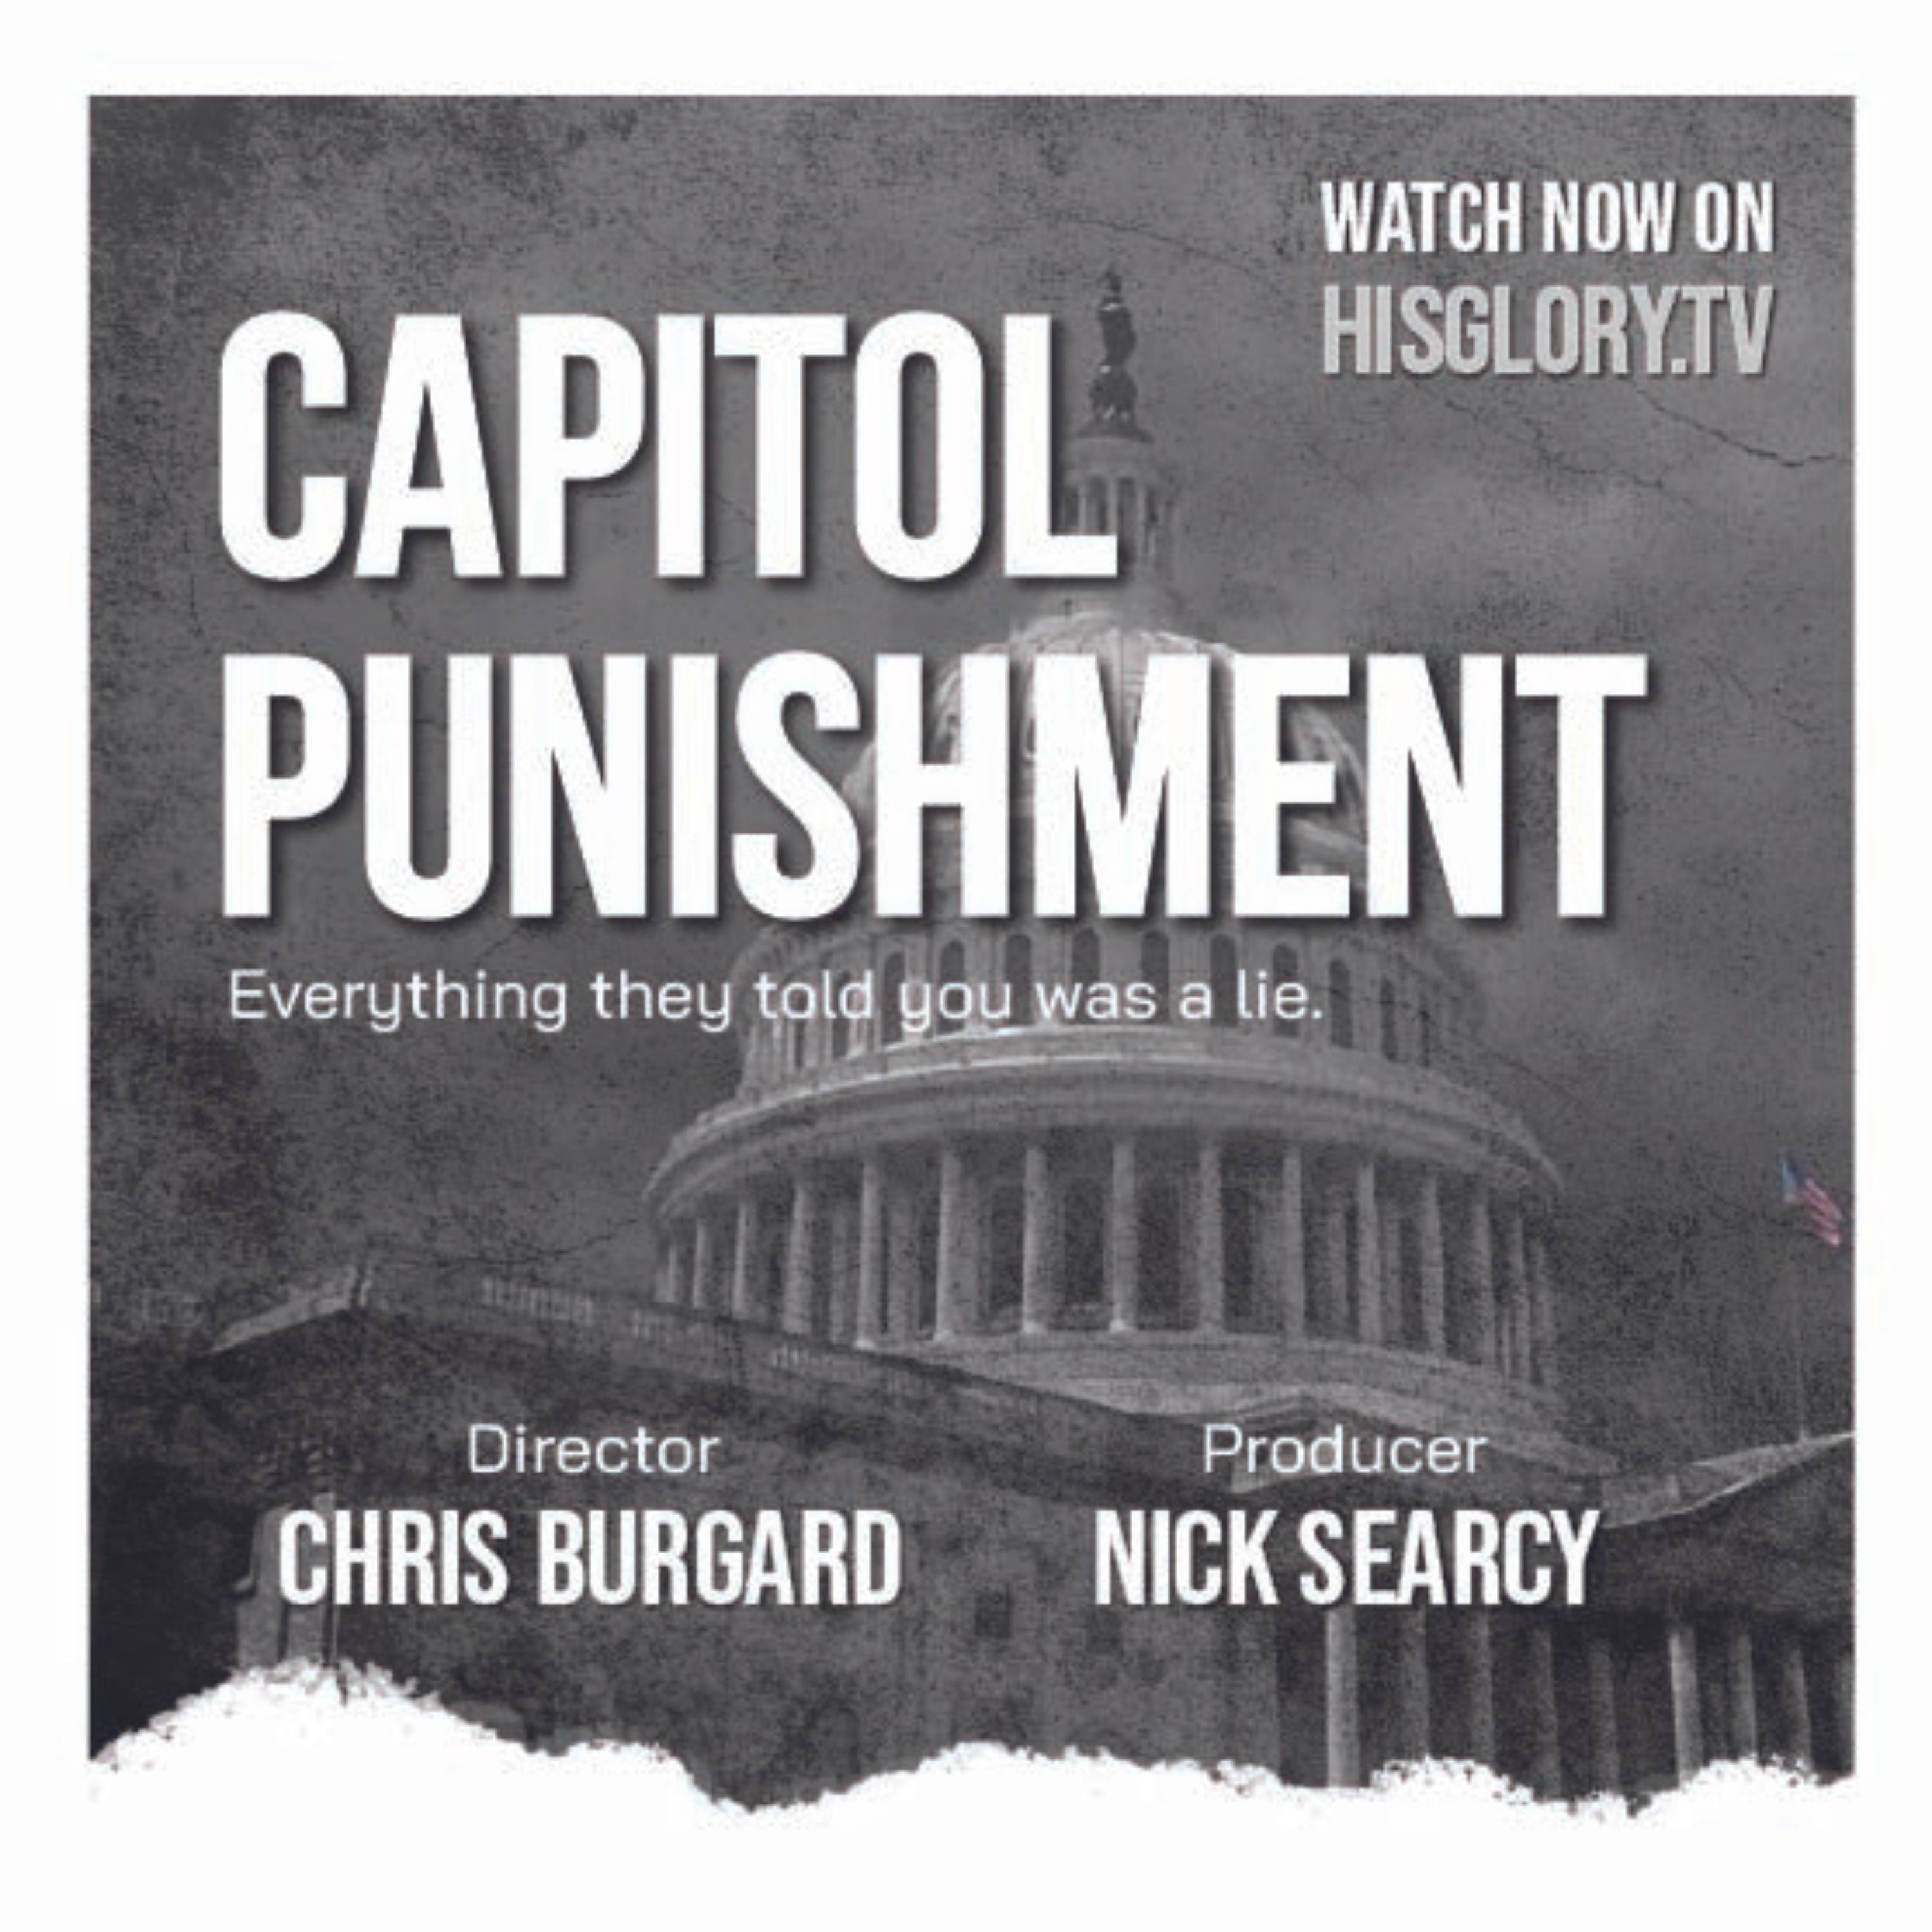 Chris Burgard Director of "Capitol Punishment" on Jan 6, Border Crisis and their Architects